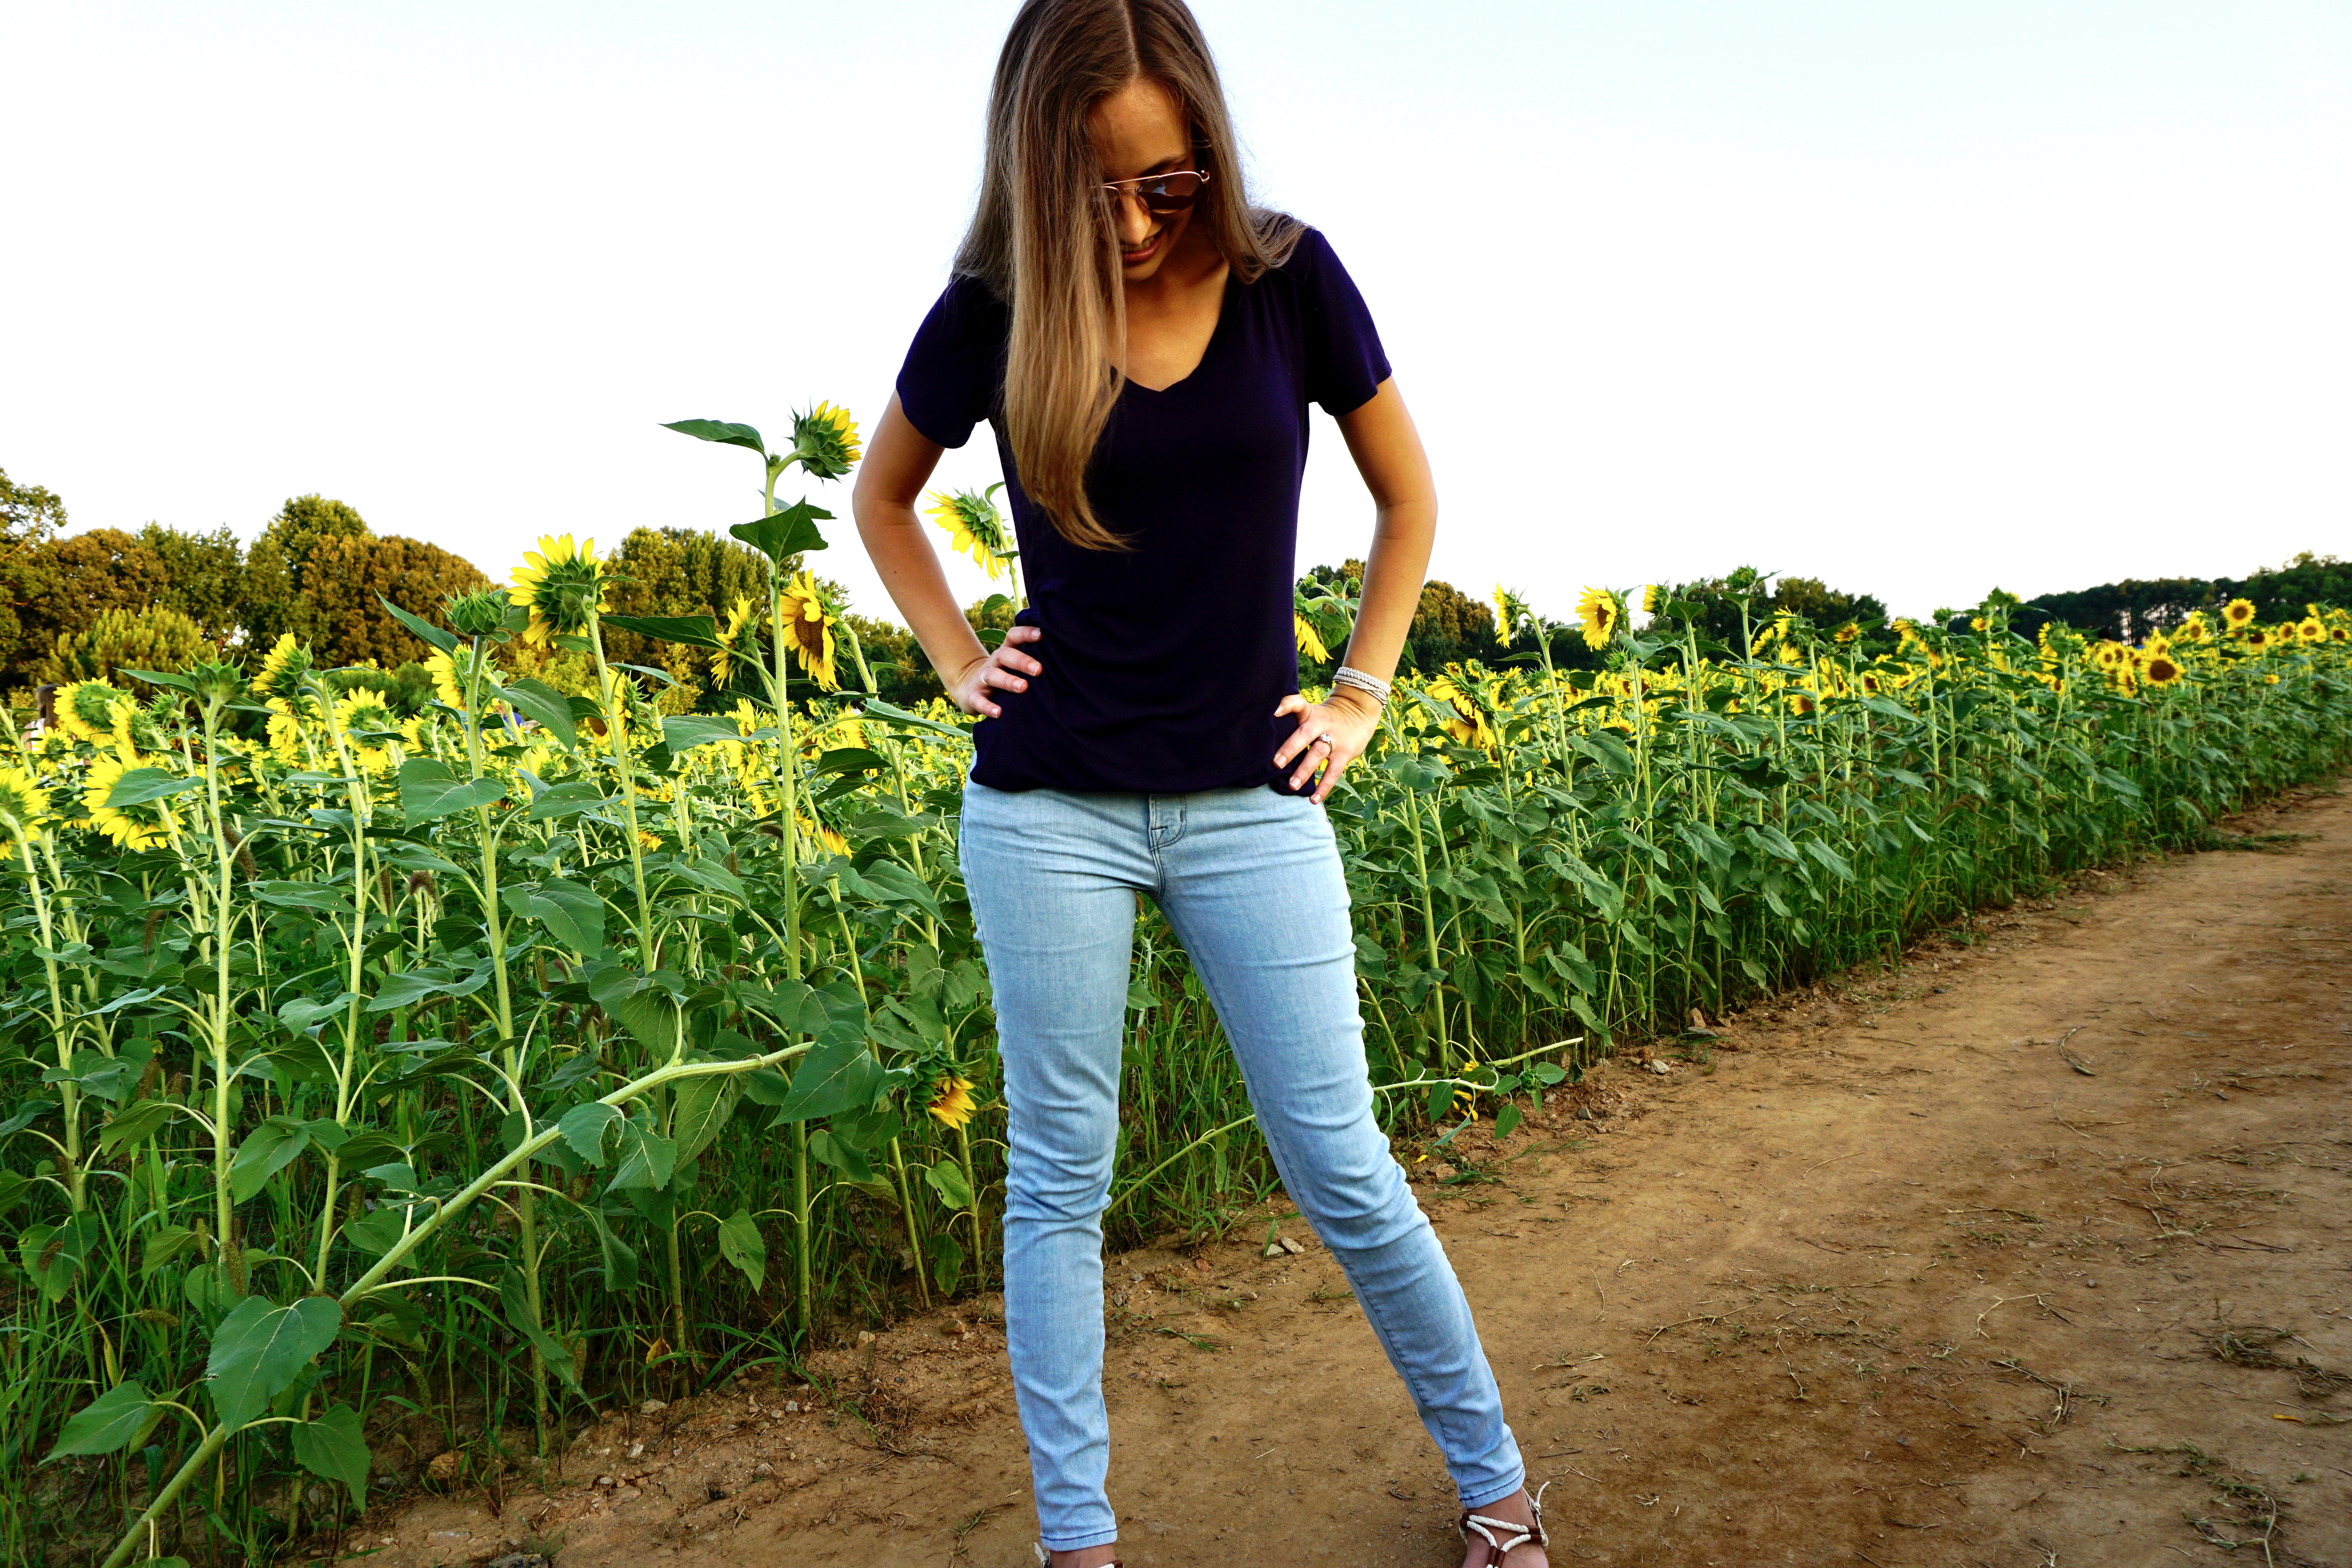 How to Buy Ethical, Sustainable Jeans